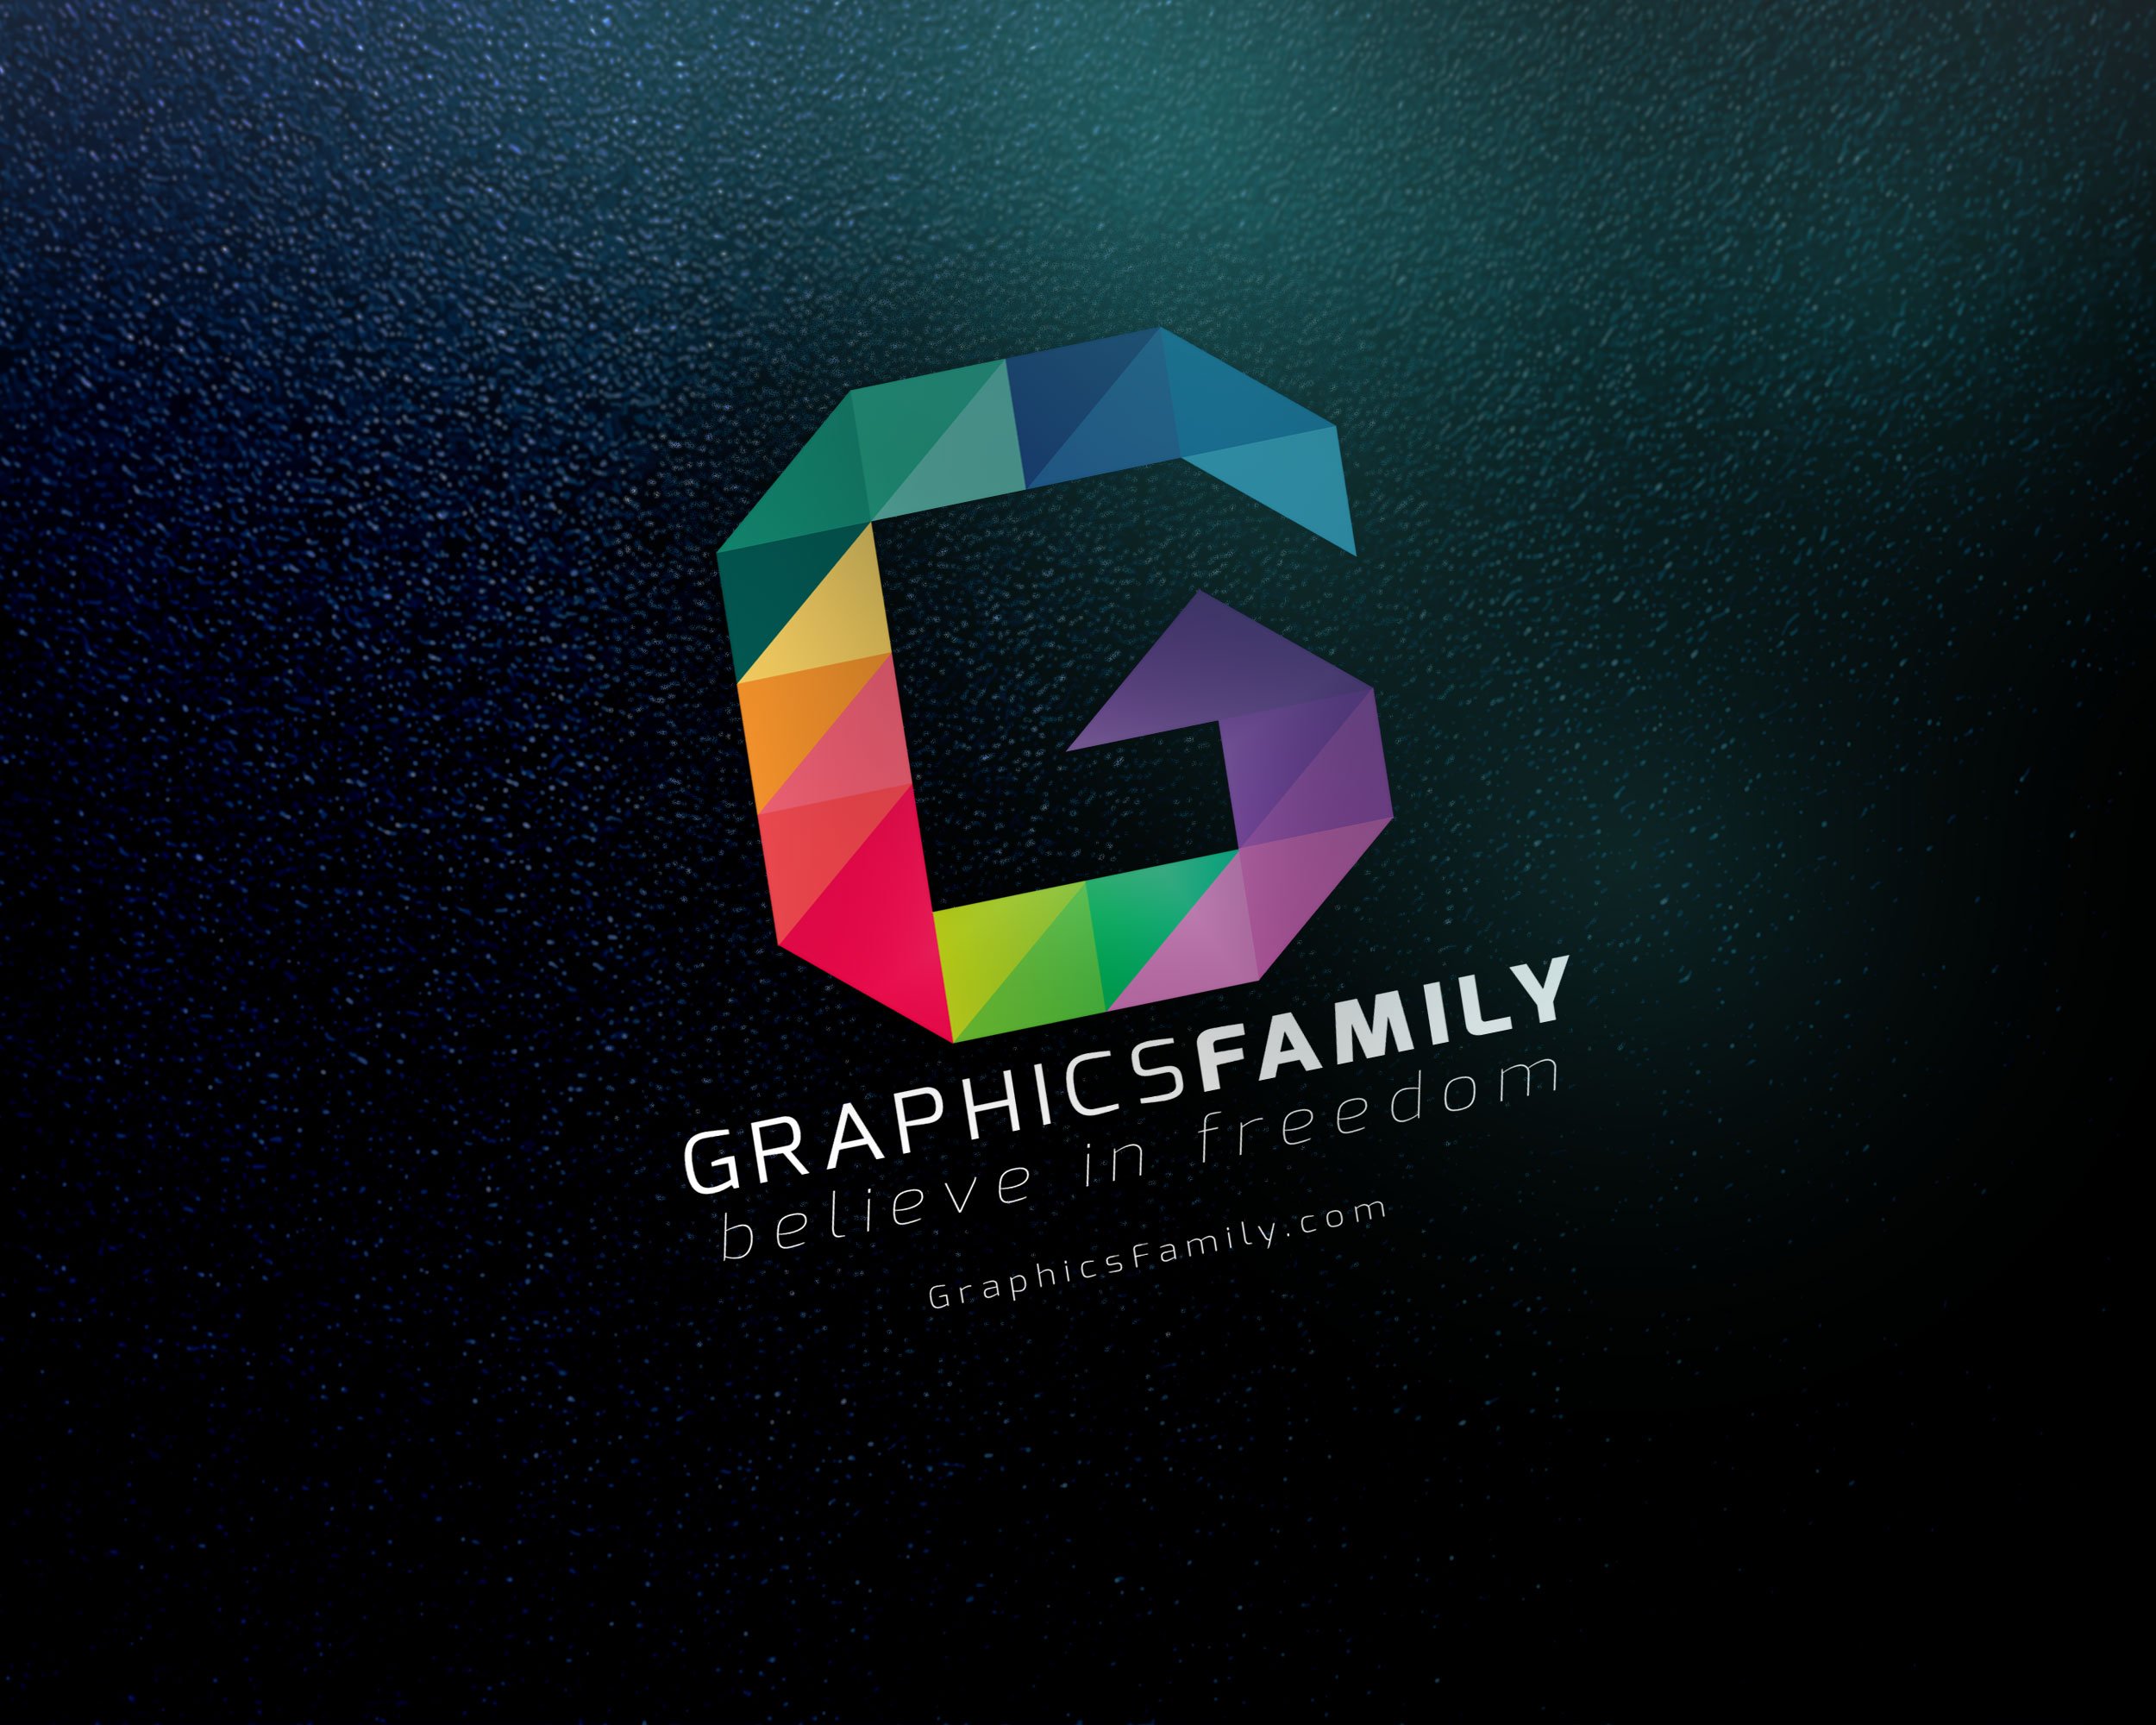 Download Logo Mock Up Psd Template Graphicsfamily